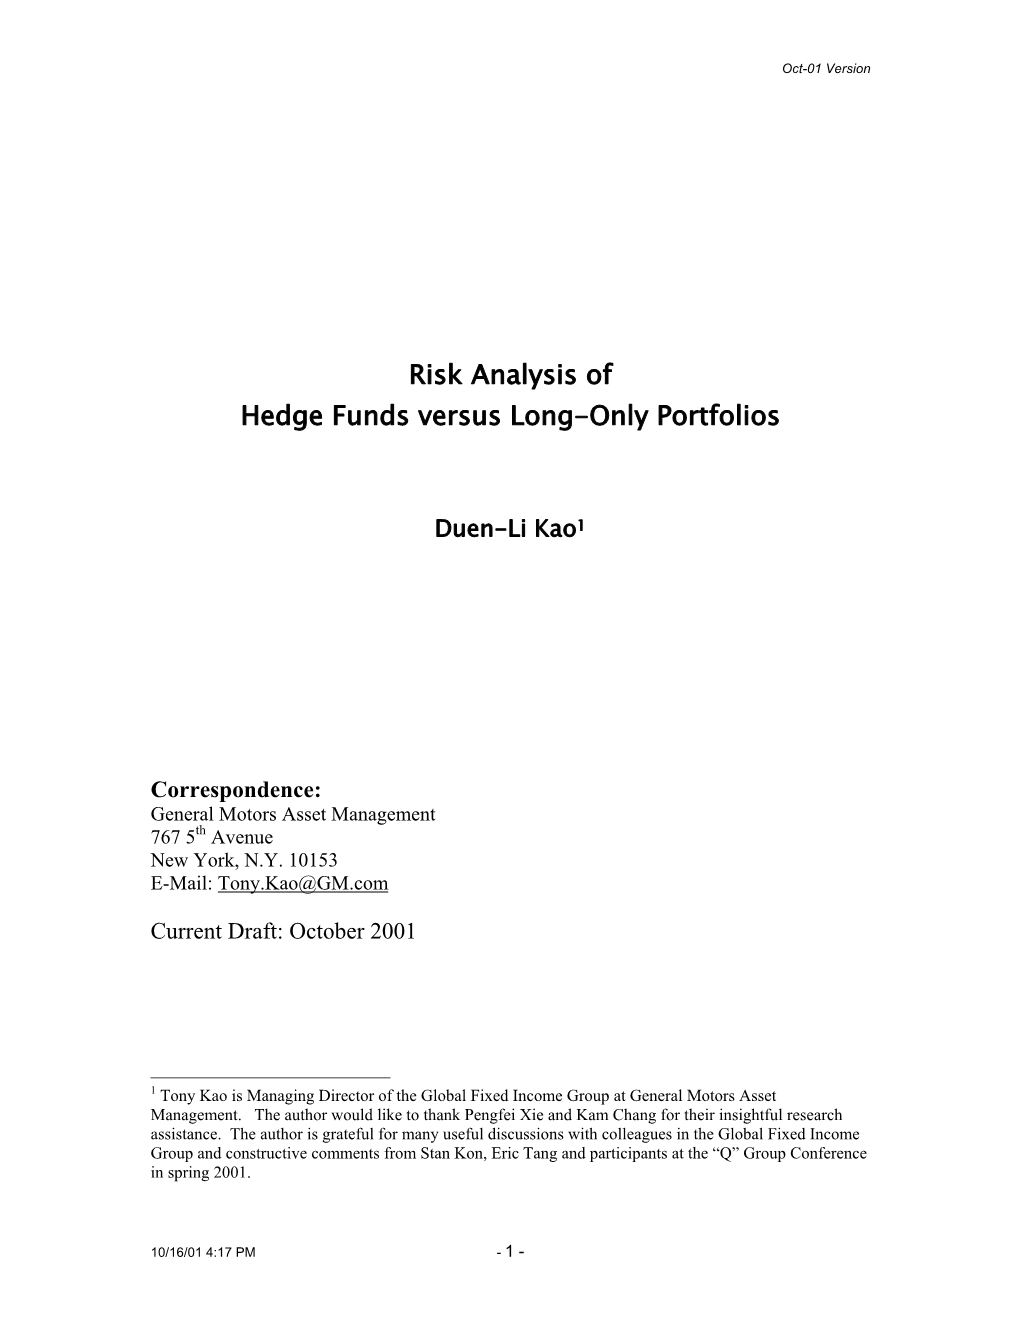 Risk Analysis of Hedge Funds Versus Long-Only Portfolios